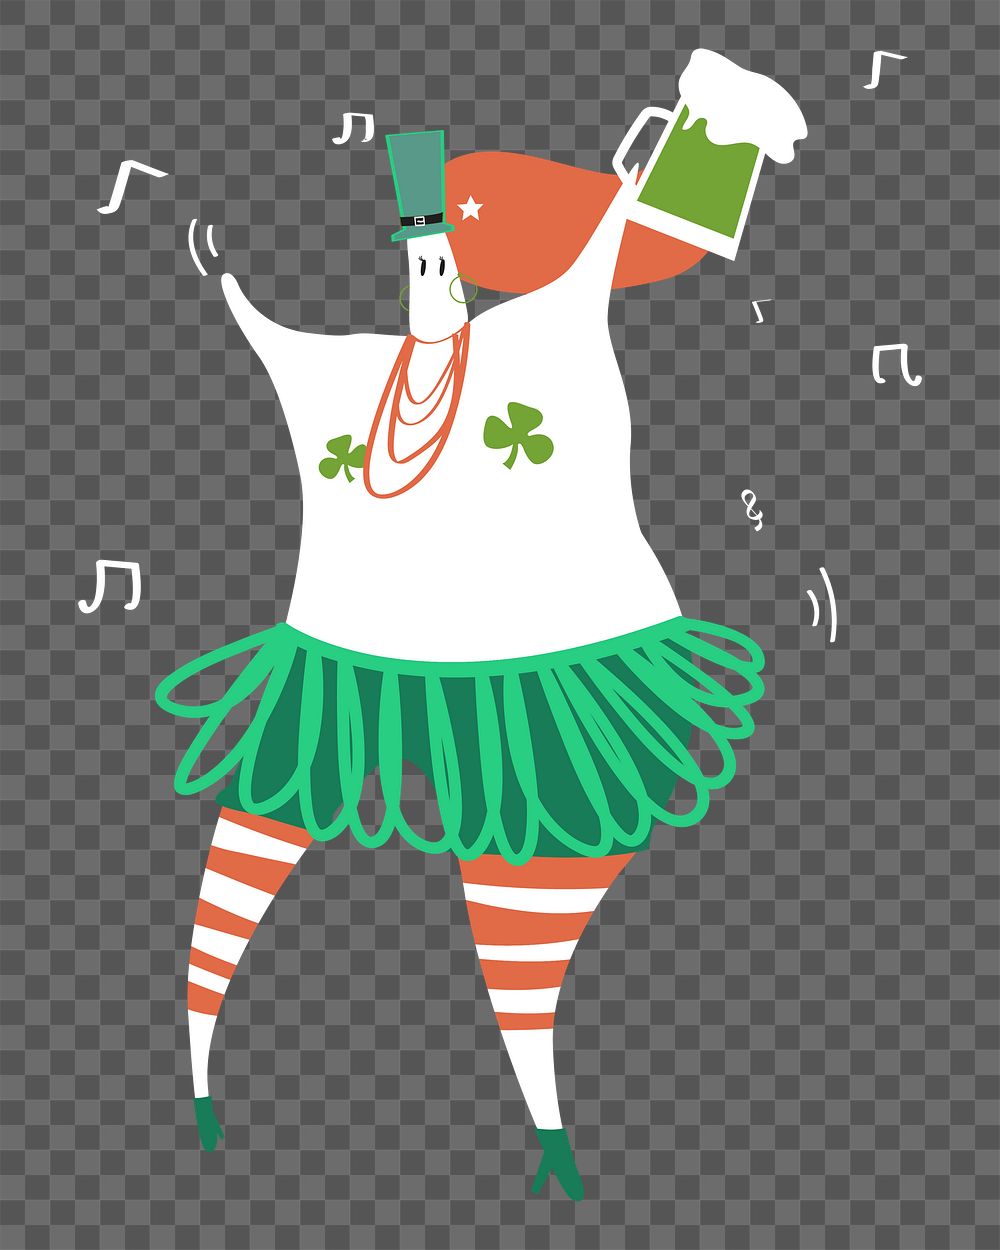 St Patricks Day Images  Free Photos, PNG Stickers, Wallpapers & Backgrounds  - rawpixel